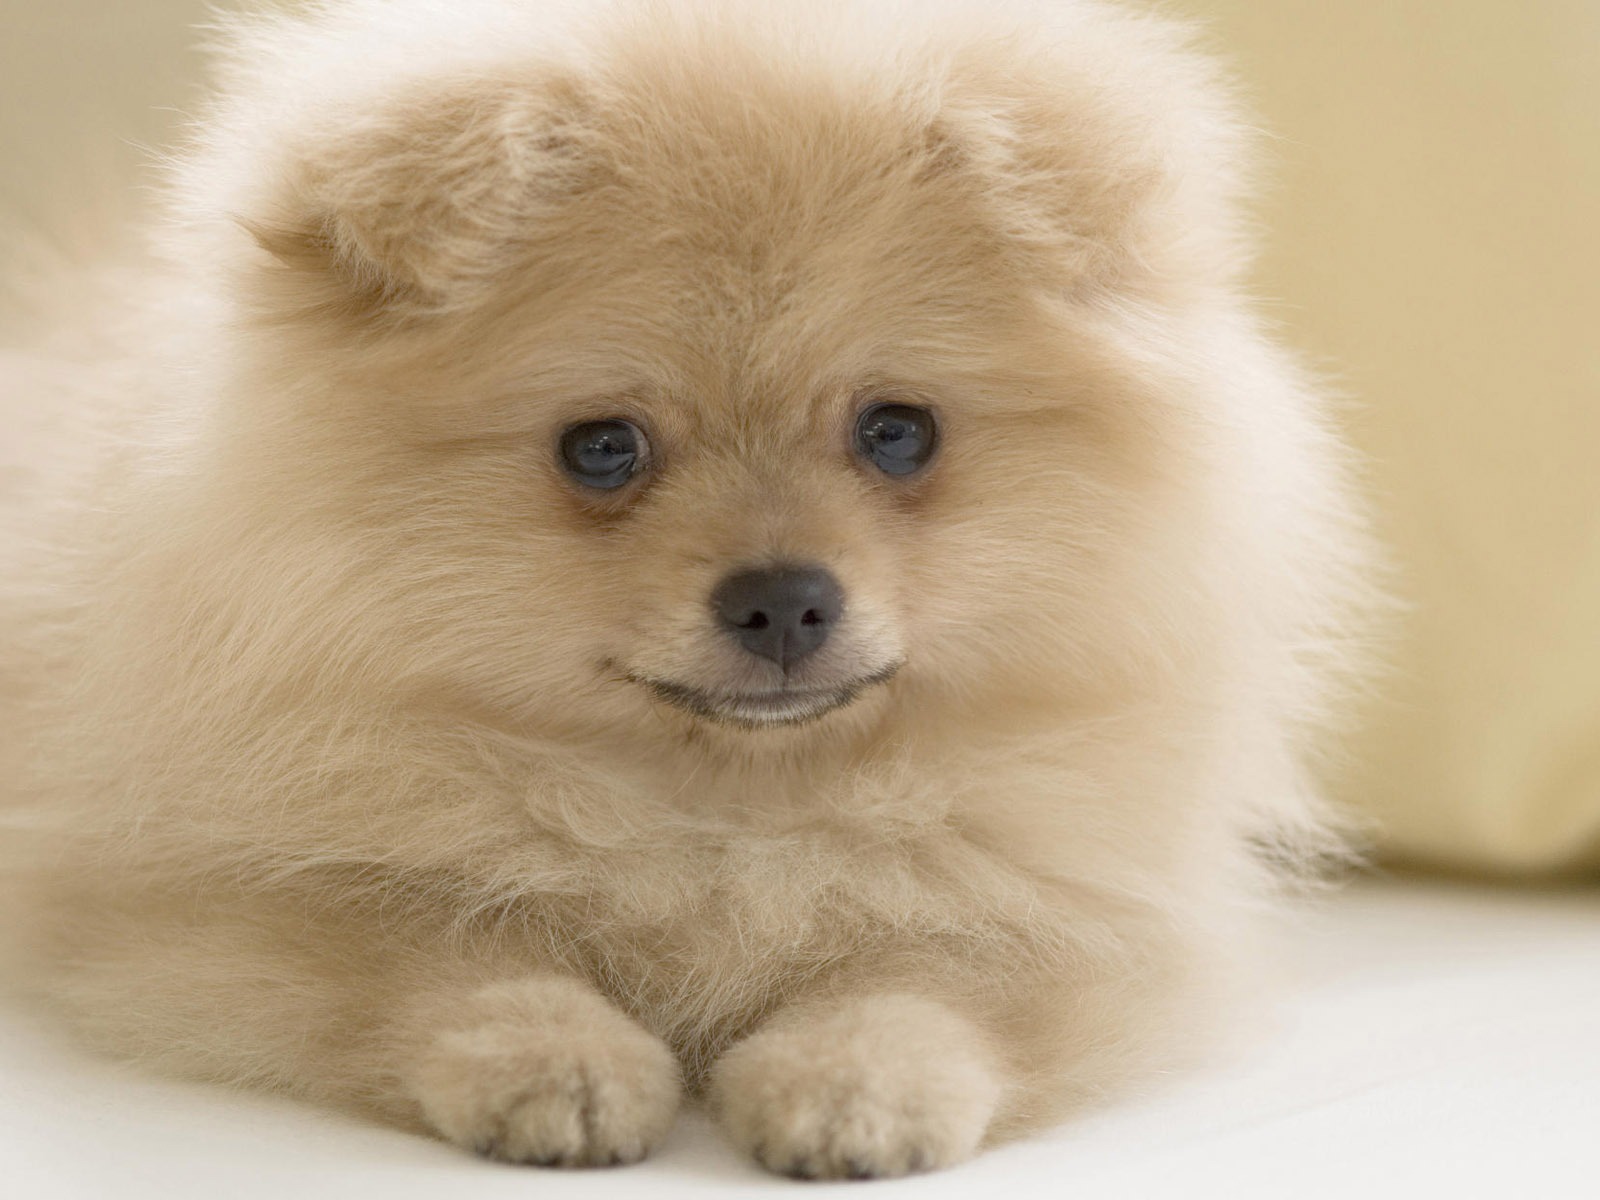 Puppy Photo HD wallpapers (10) #12 - 1600x1200